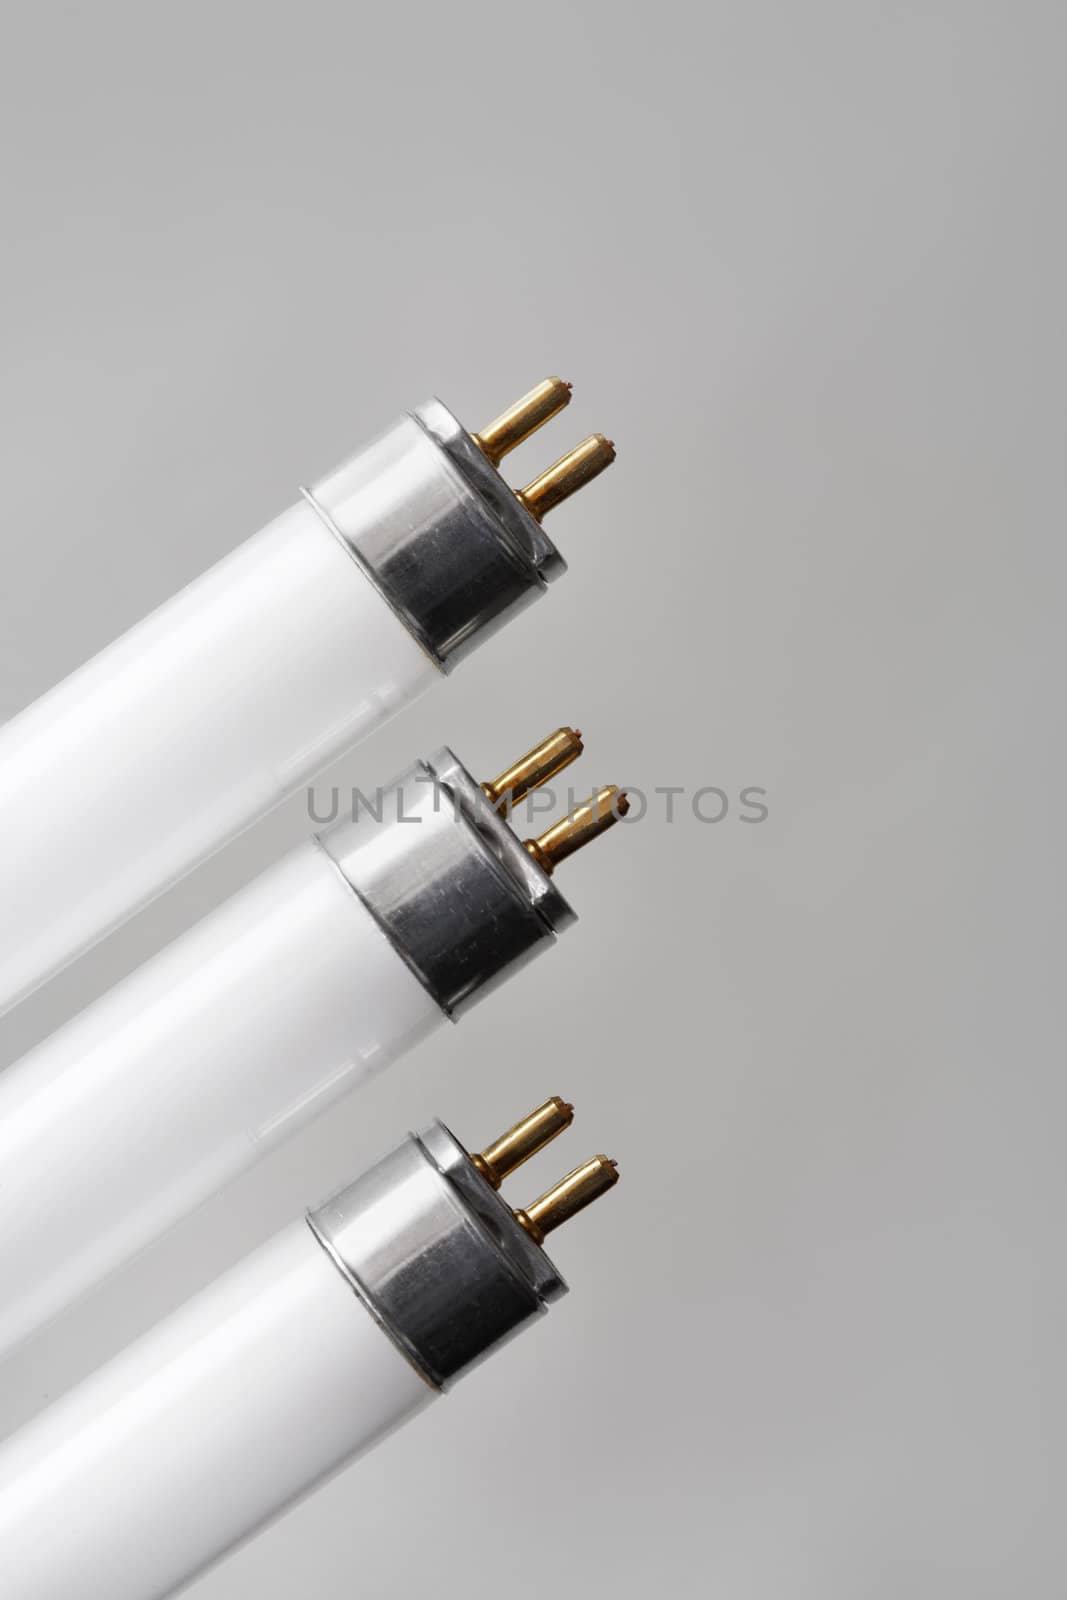 Fluorescent tubes by Stocksnapper